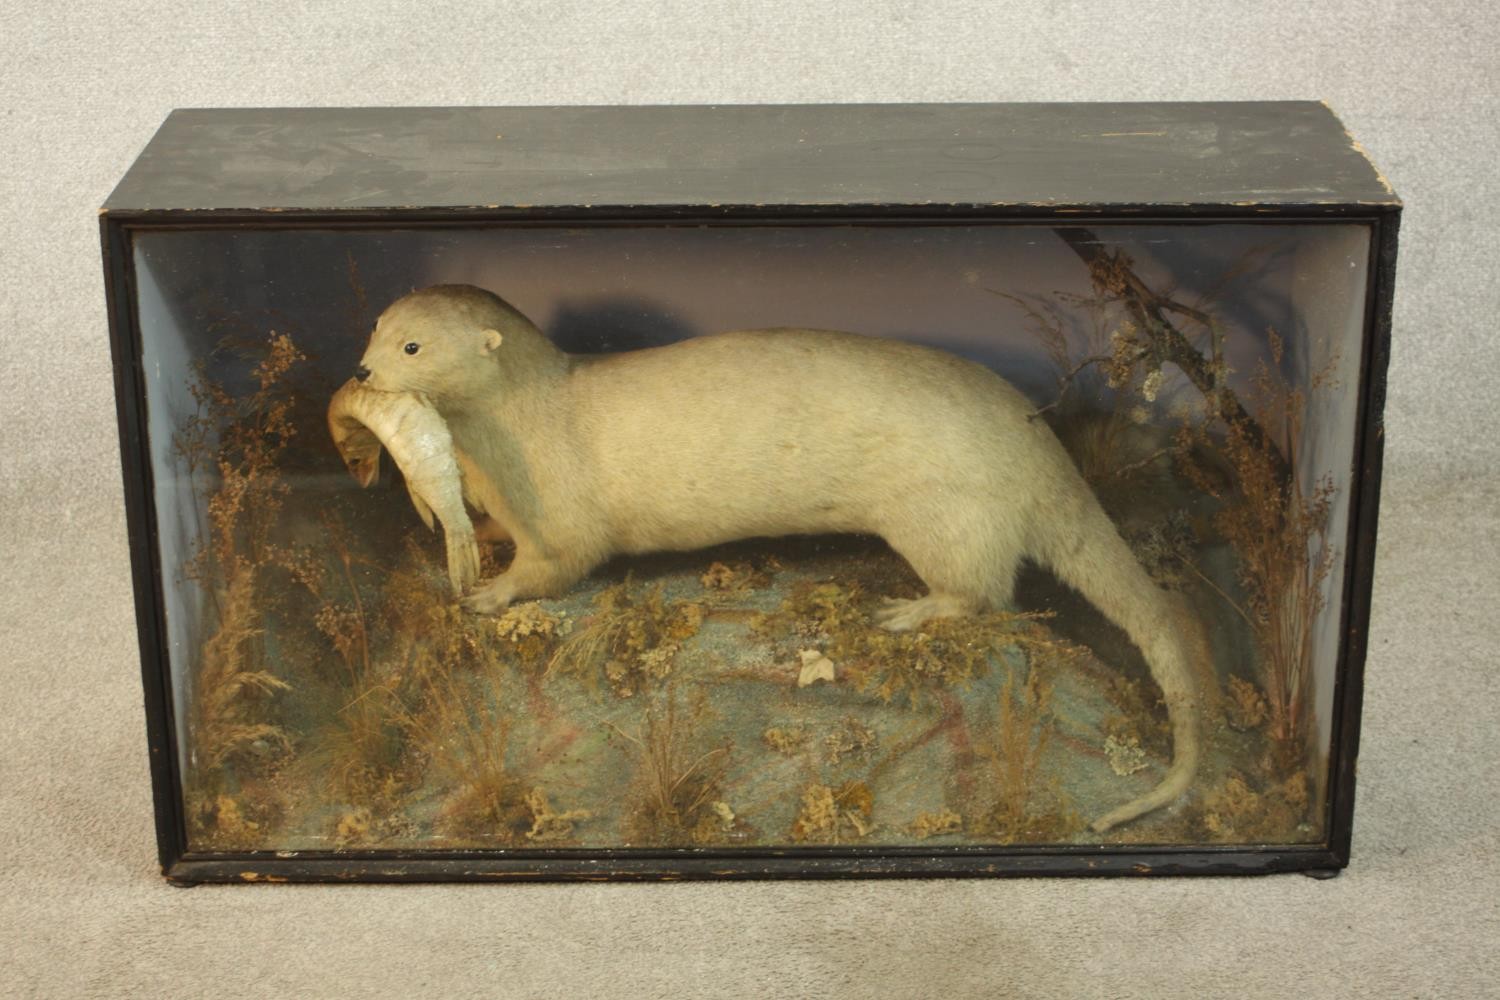 A 19th century cased taxidermy white otter with a fish in its mouth set in a naturalistic setting.